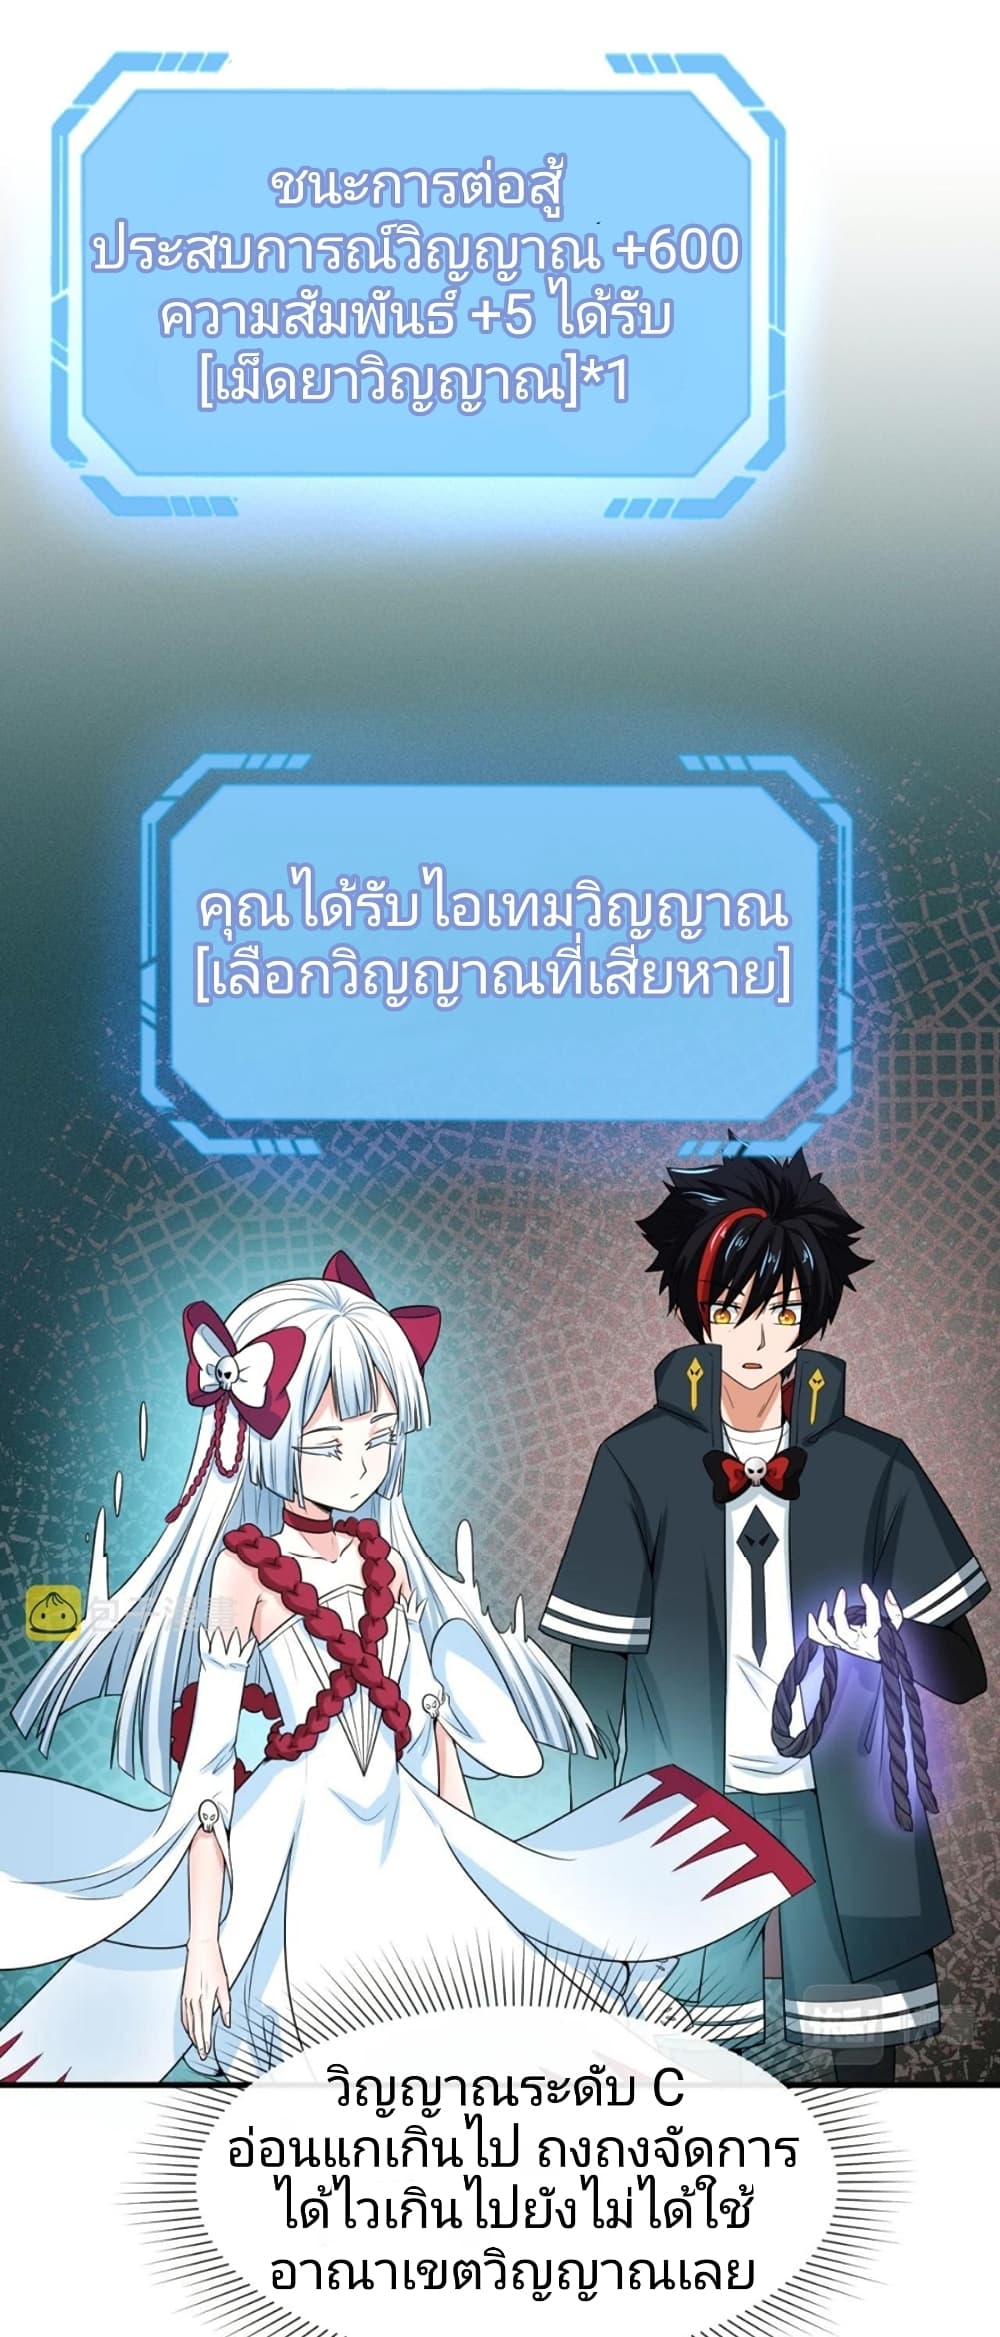 The Age of Ghost Spirits à¸à¸­à¸à¸à¸µà¹ 8 (46)